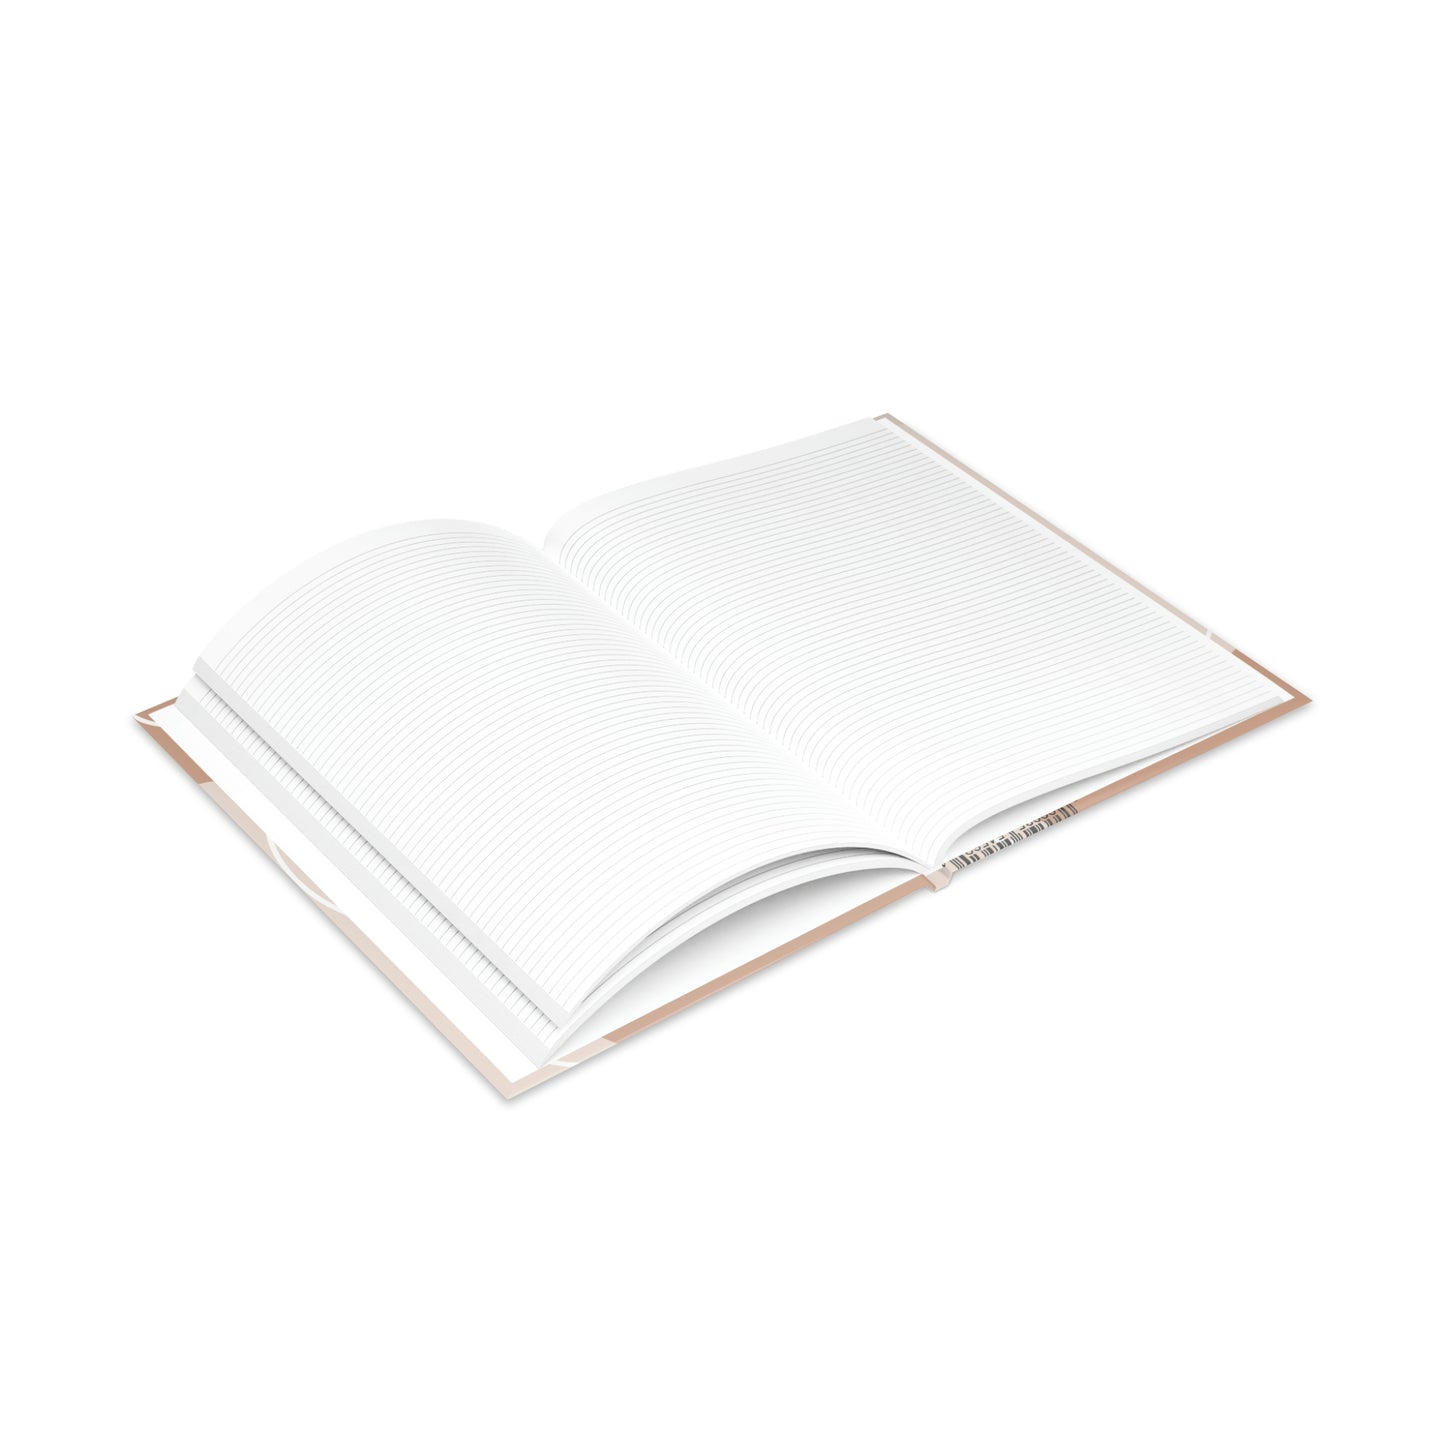 Daily Business Hardcover Notebook with Puffy Covers for Christian Entrepreneurs